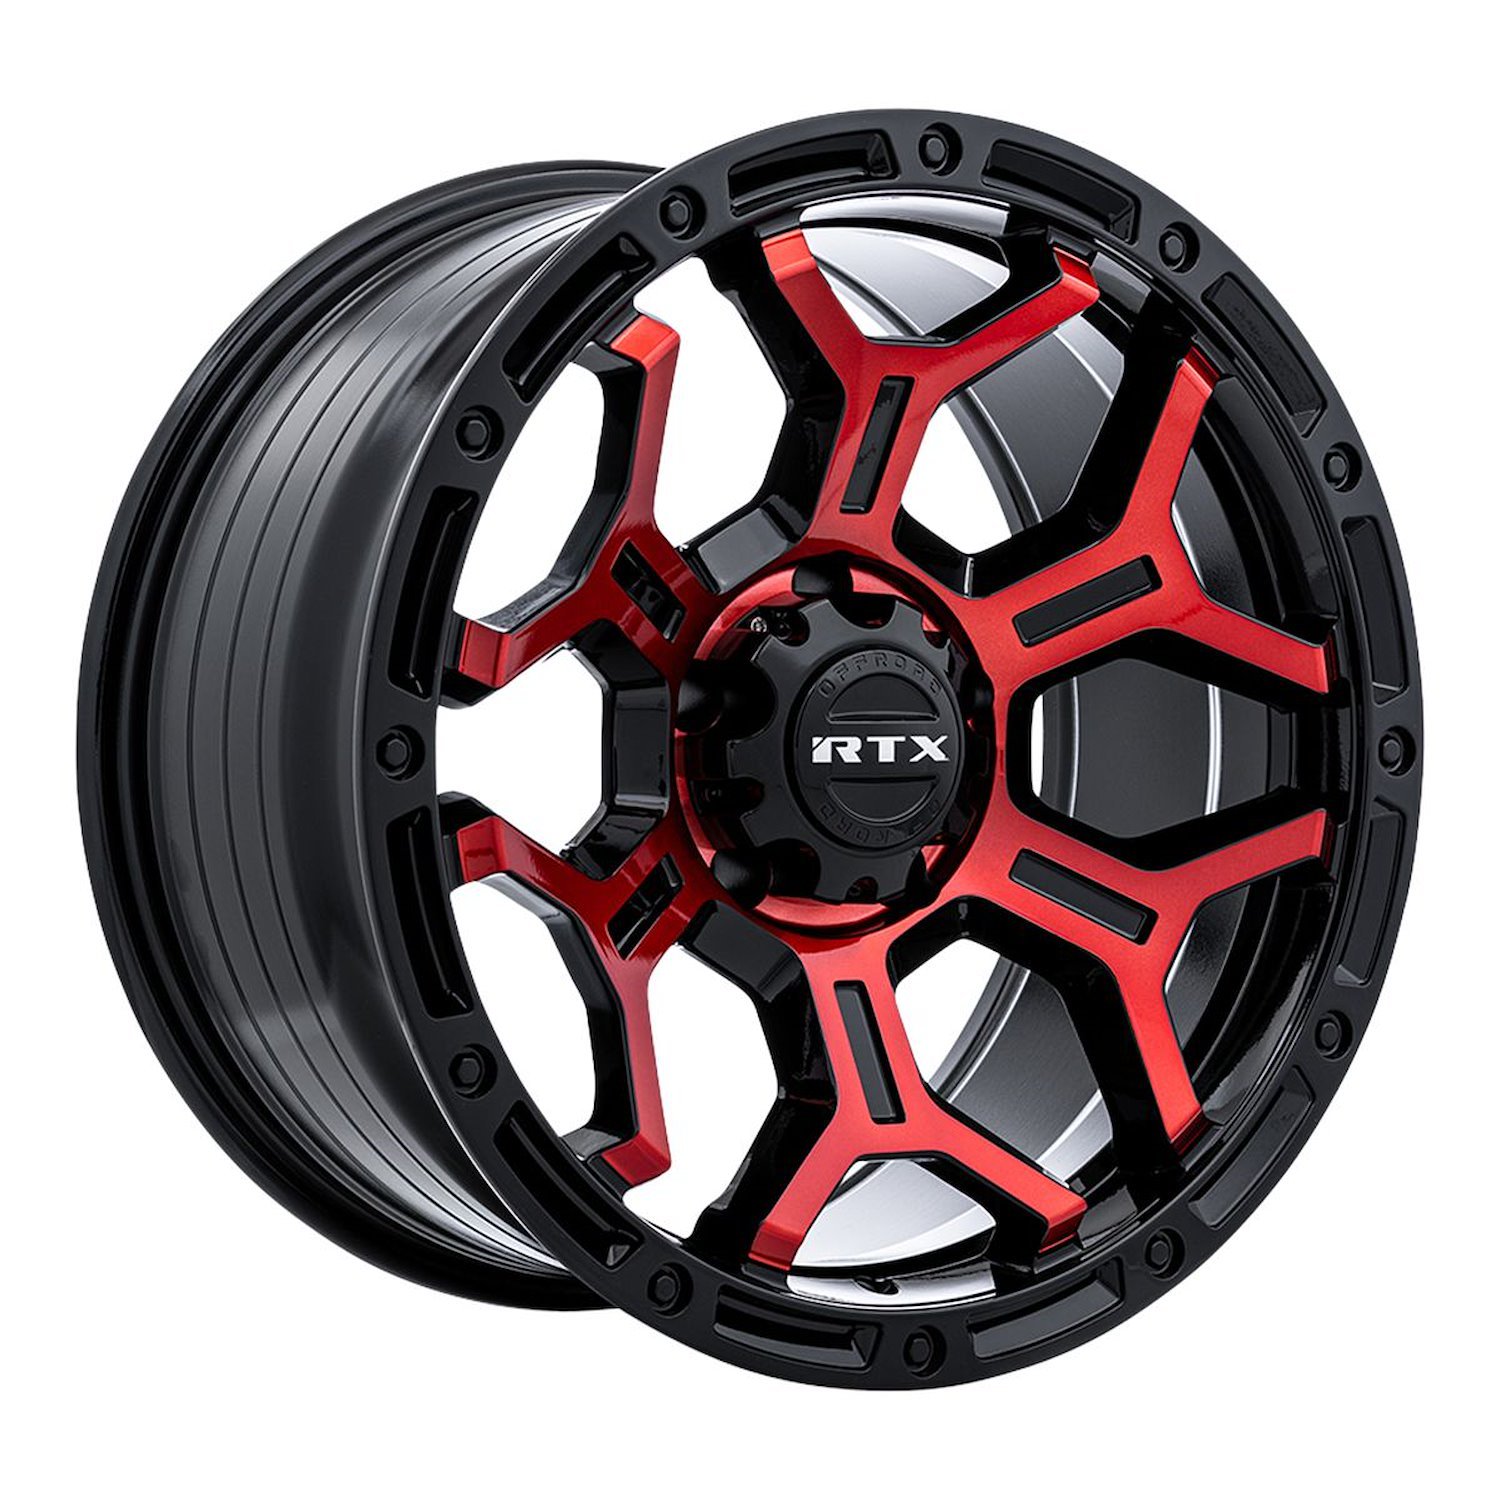 083105 Off-Road Series Goliath Wheel [Size: 18" x 9"] Gloss Black Machined Red Spokes Finish